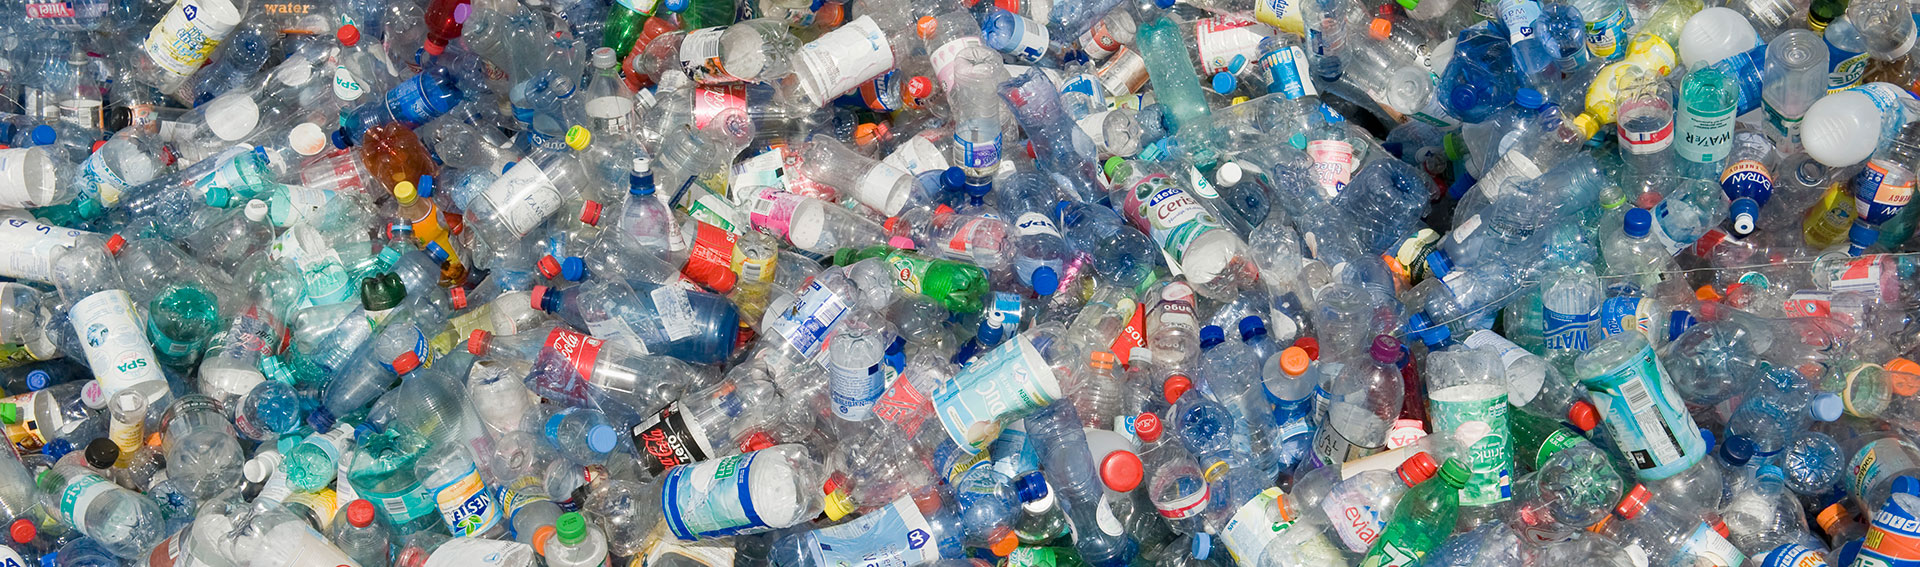 Survey: Investors Increasingly Interested in Responsible Investments, Concerned About Plastic